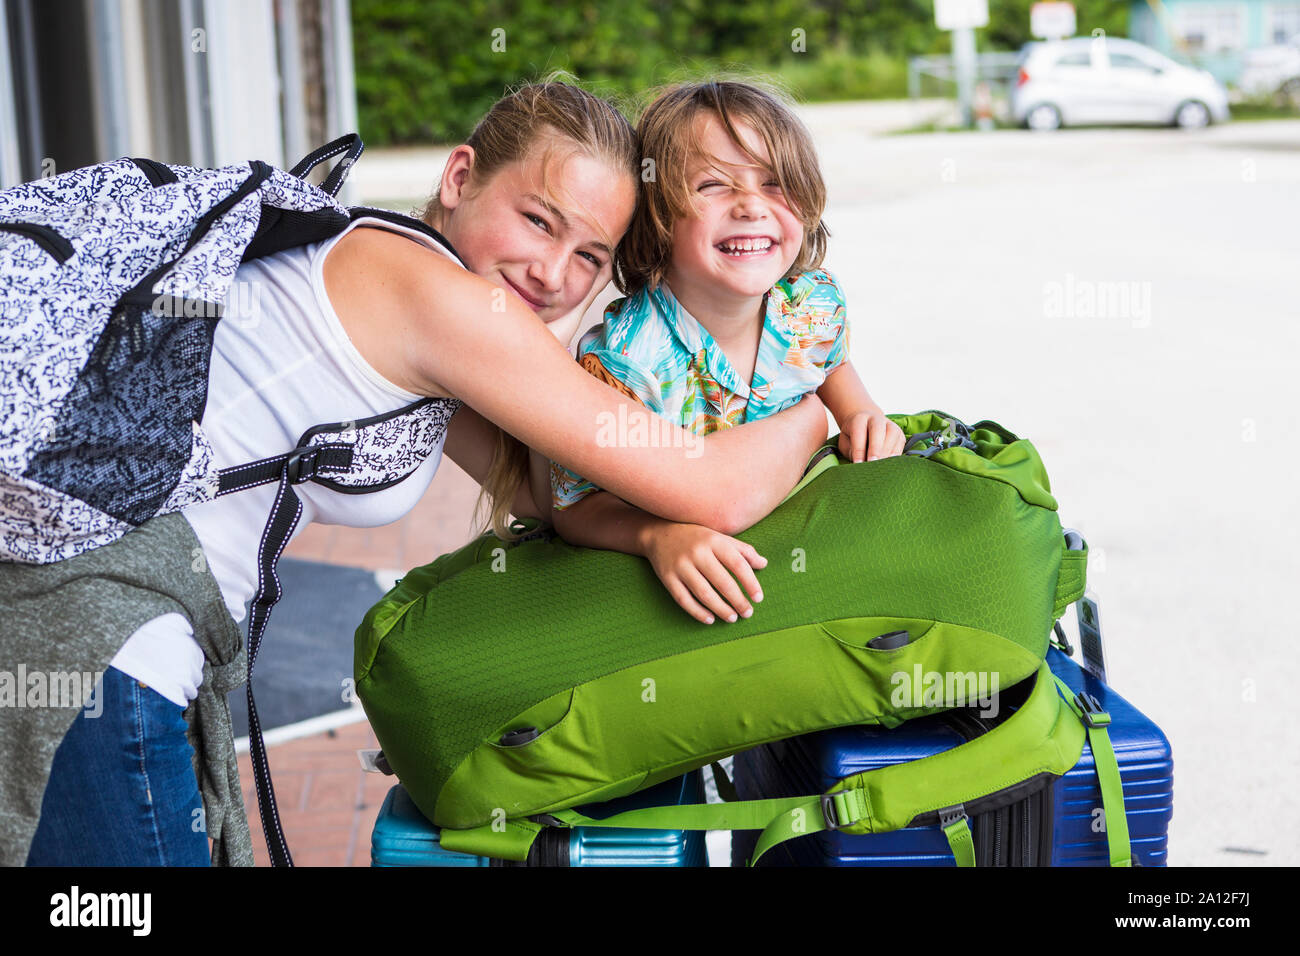 13 year old sister and her 5 year old brother leaning on travel luggage Stock Photo